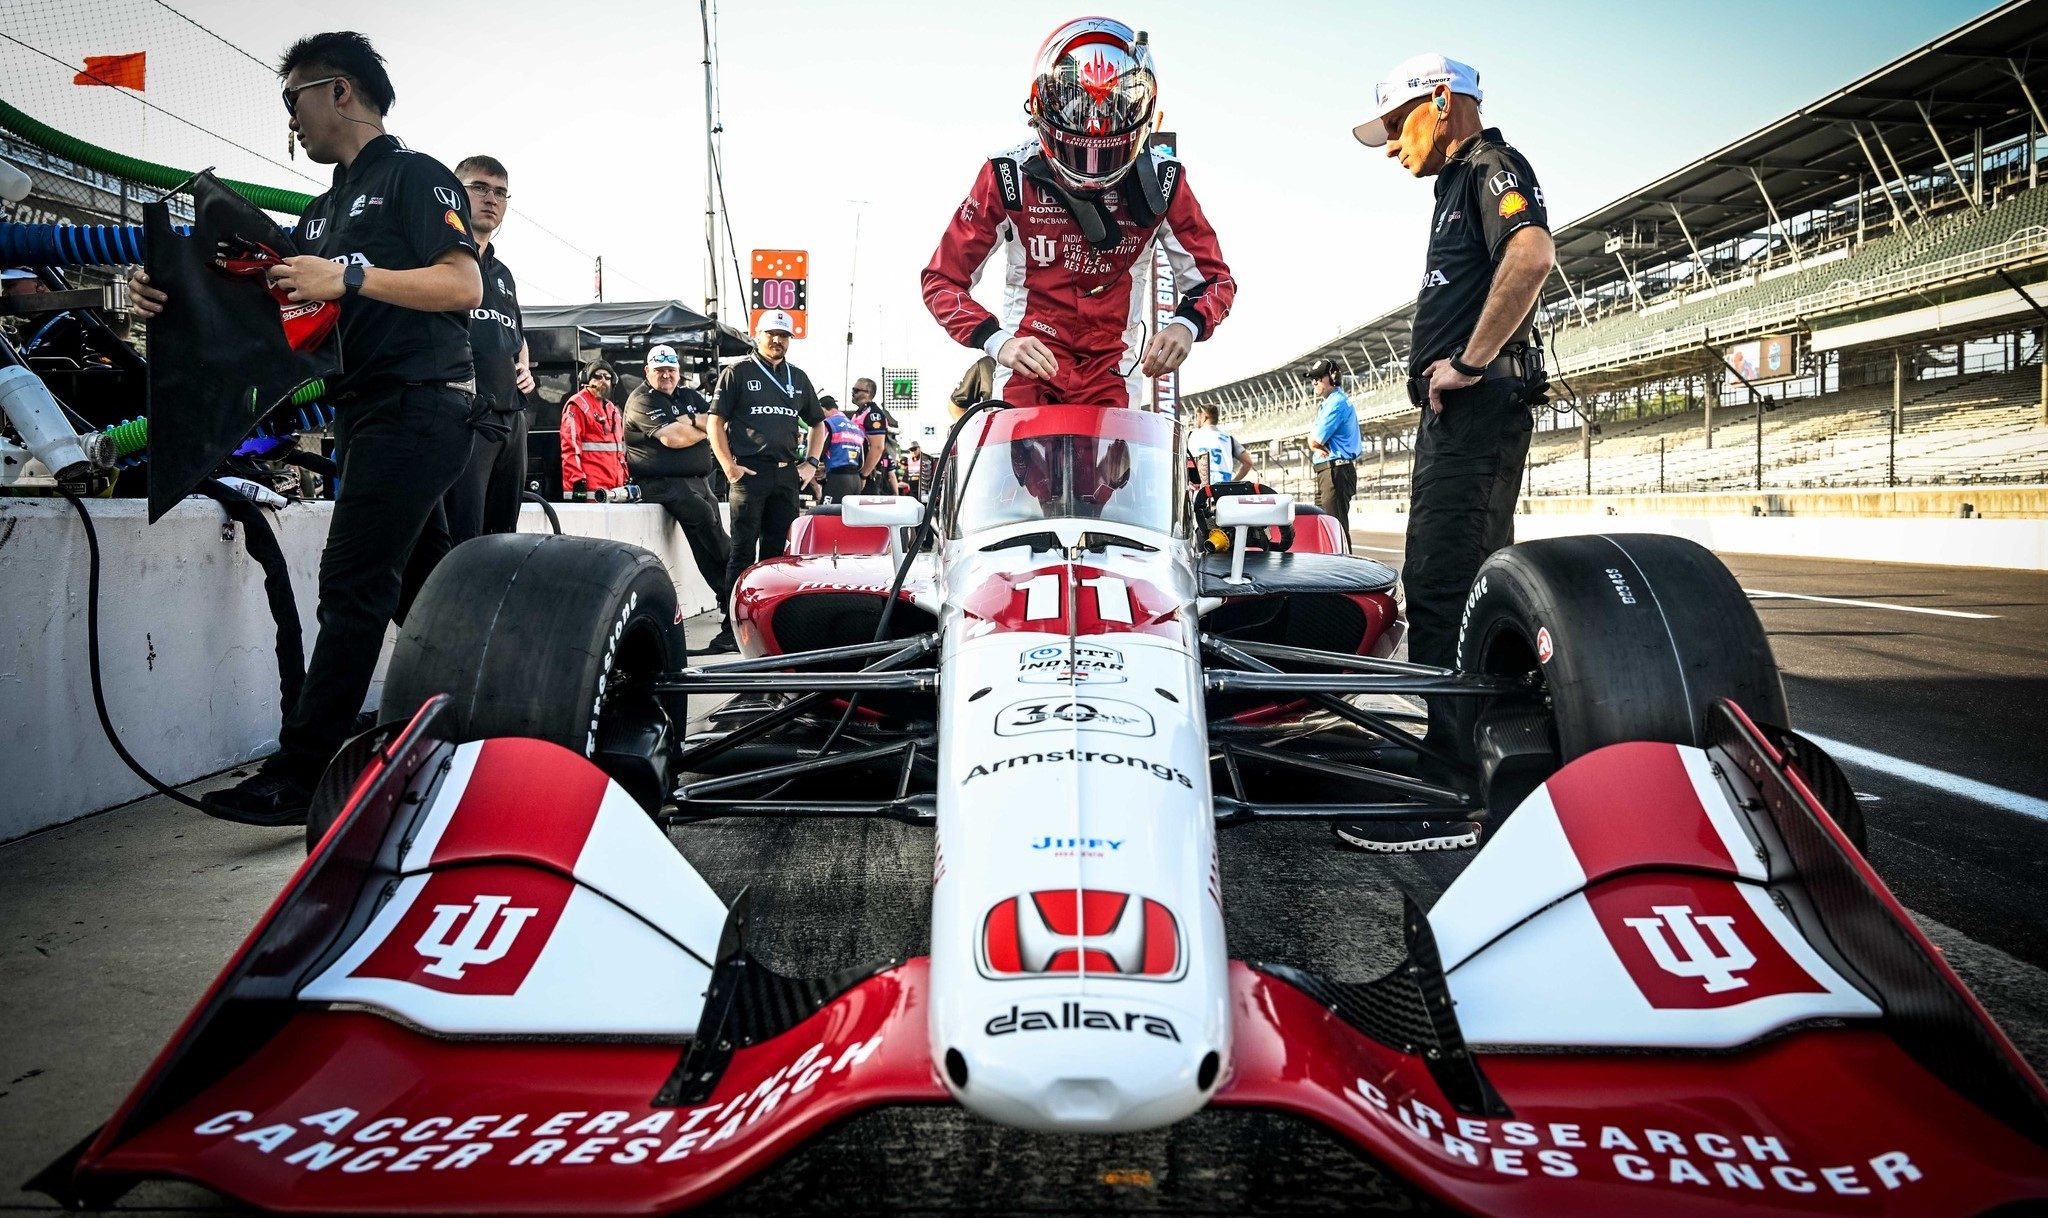 Rahal qualifies on pole at Indianapolis, Armstrong fastest Kiwi in